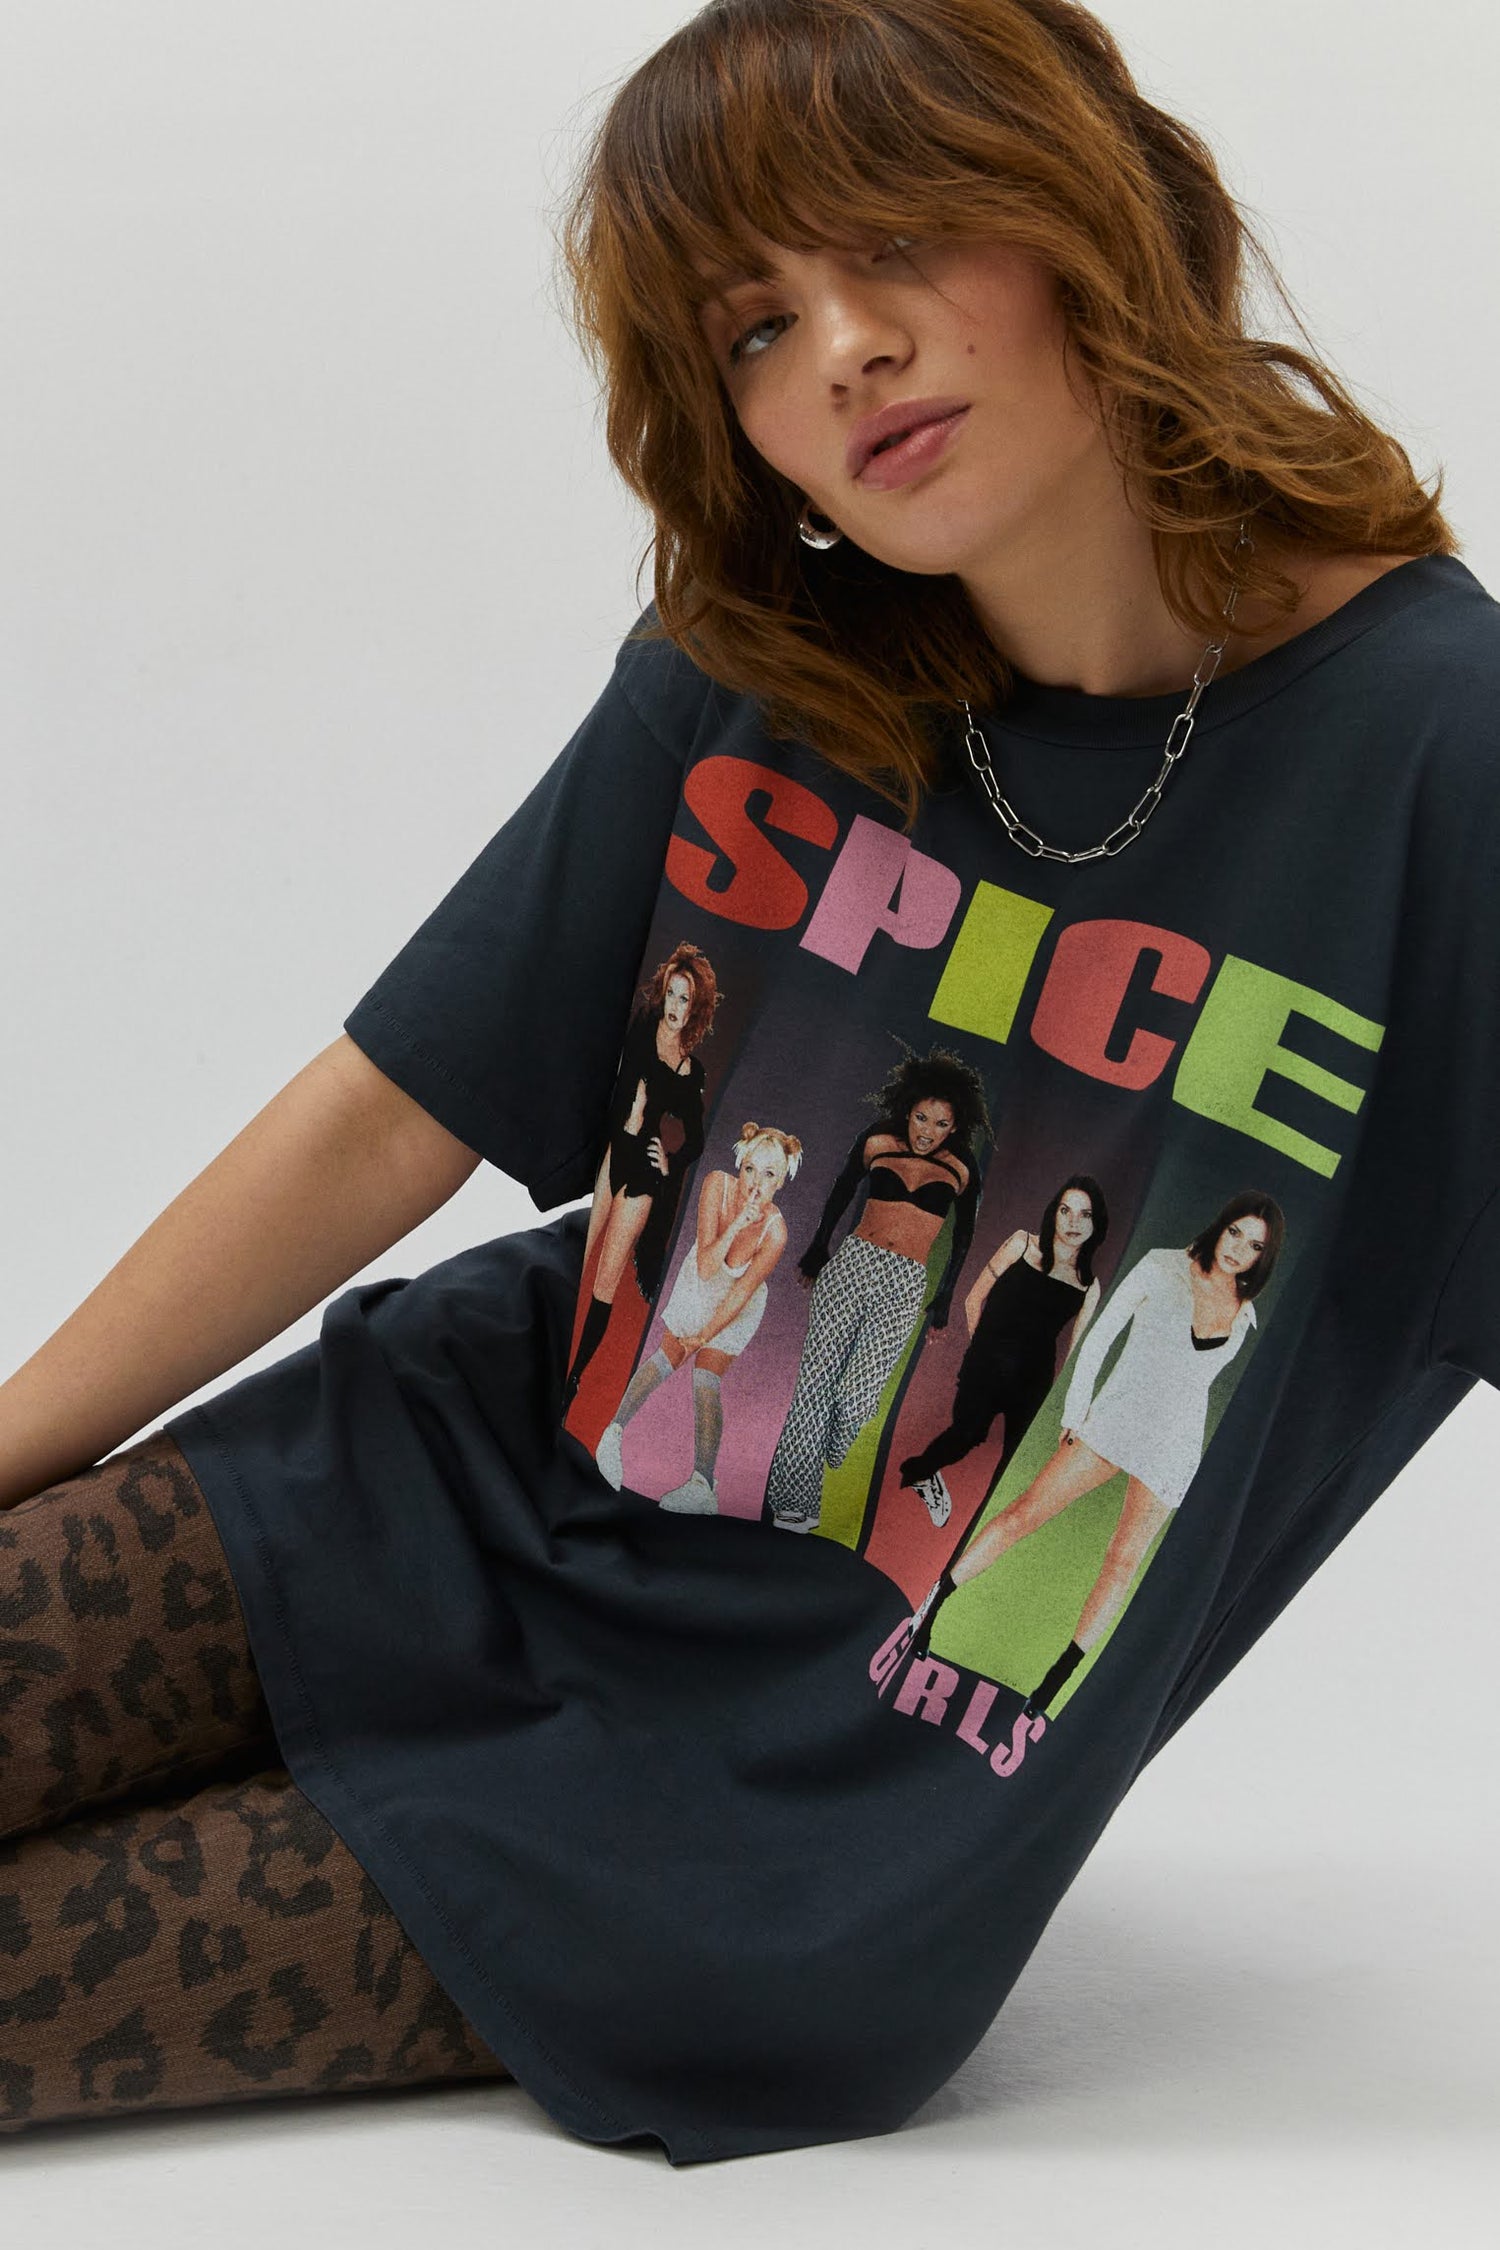 black tee designed with the "Spice Up Your Life"